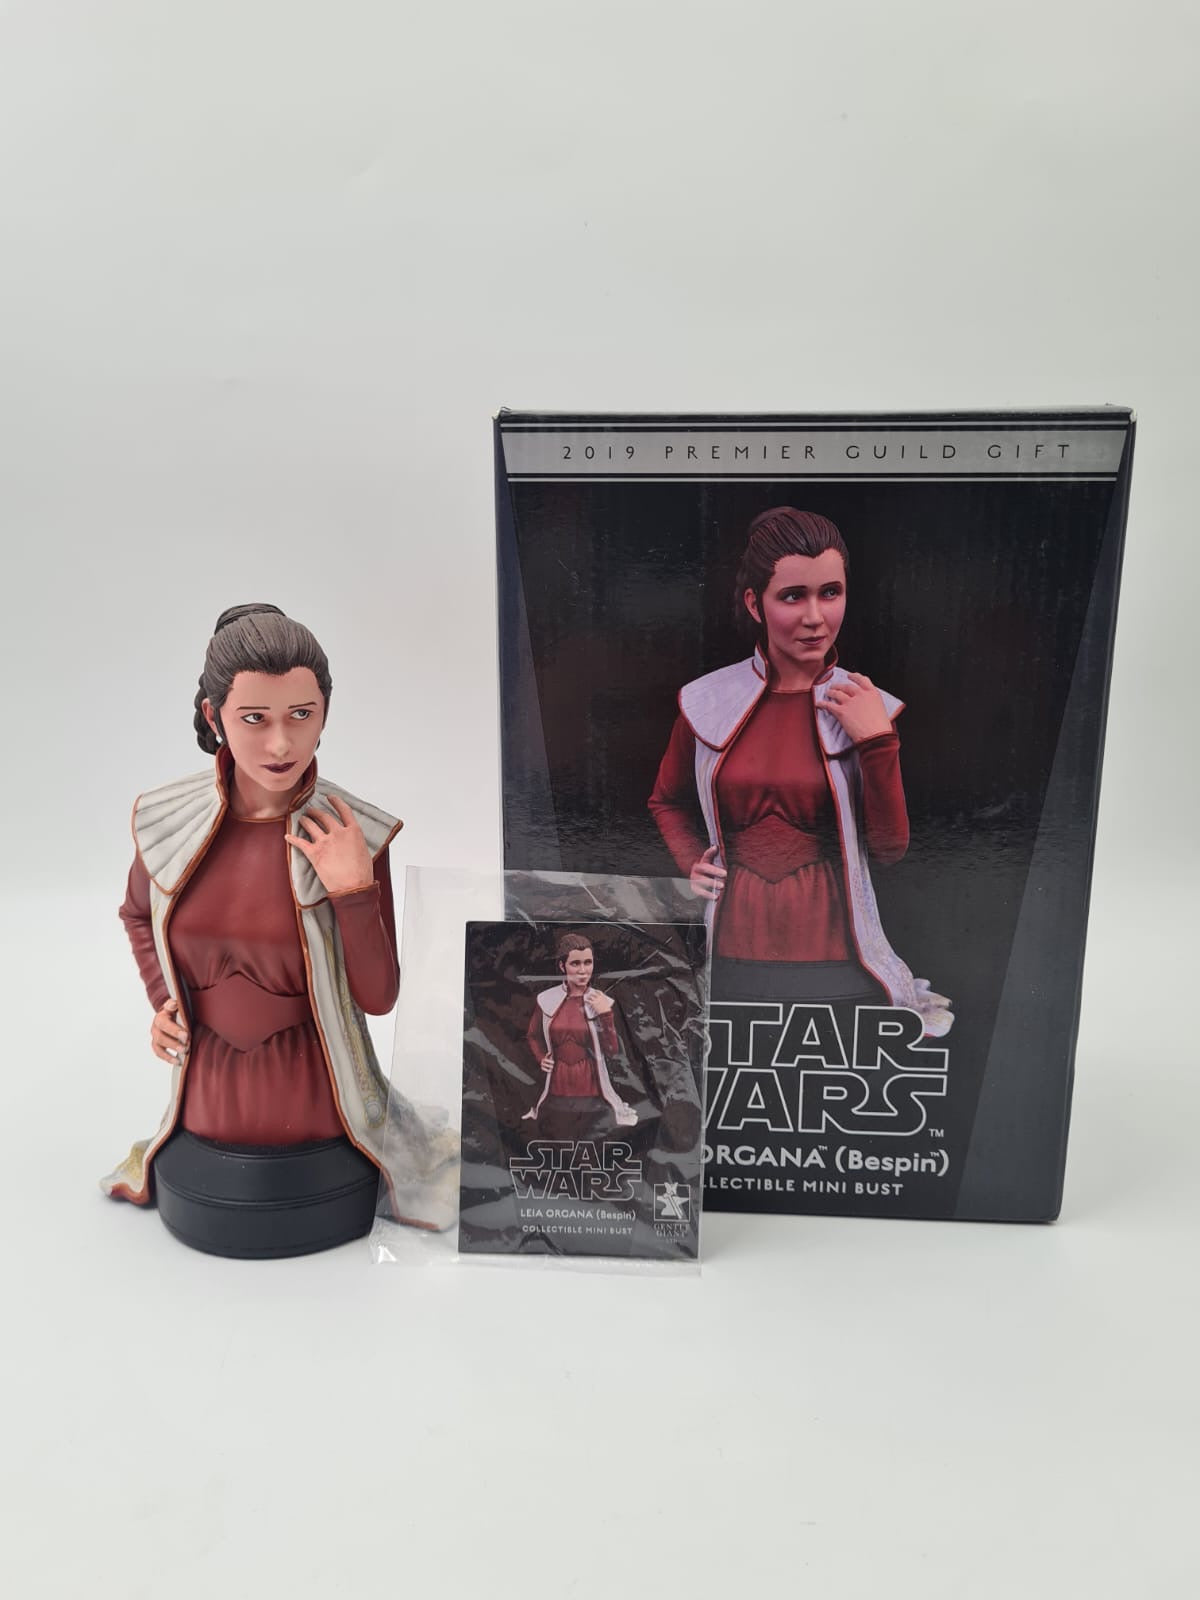 LEIA ORGANA (BESPIN) COLLECTIBLE MINI BUST 2019 PREMIER GUILD GIFT GENTLE GIANT